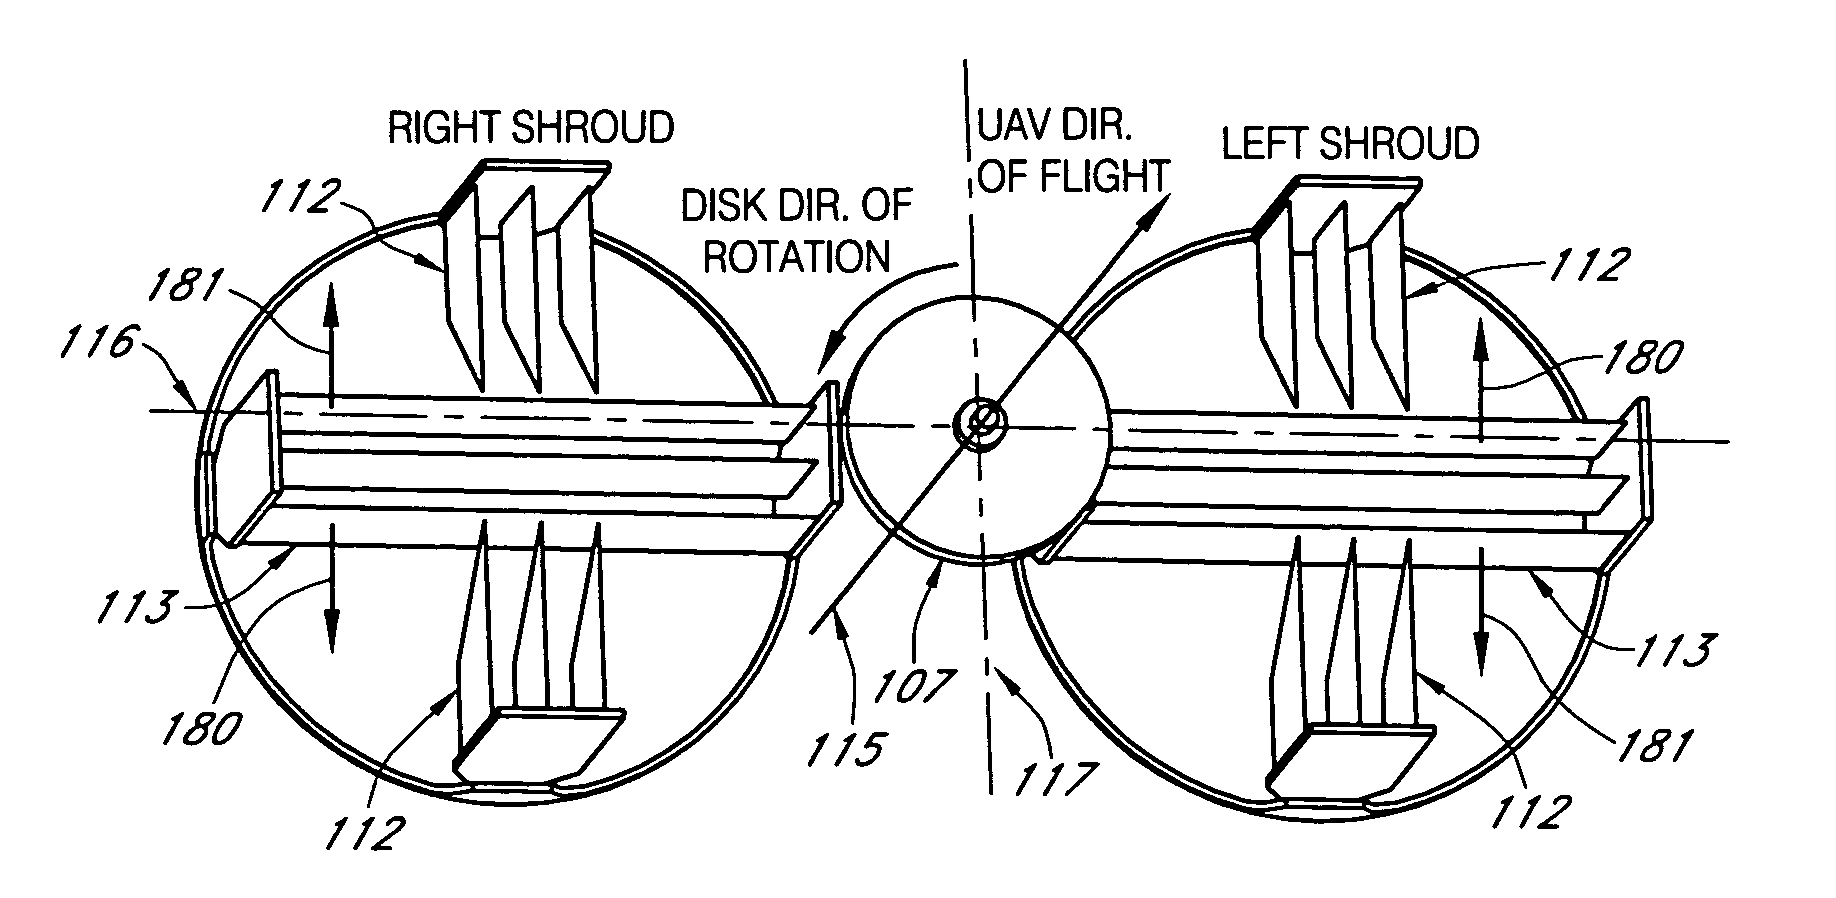 Gyro-stabilized air vehicle